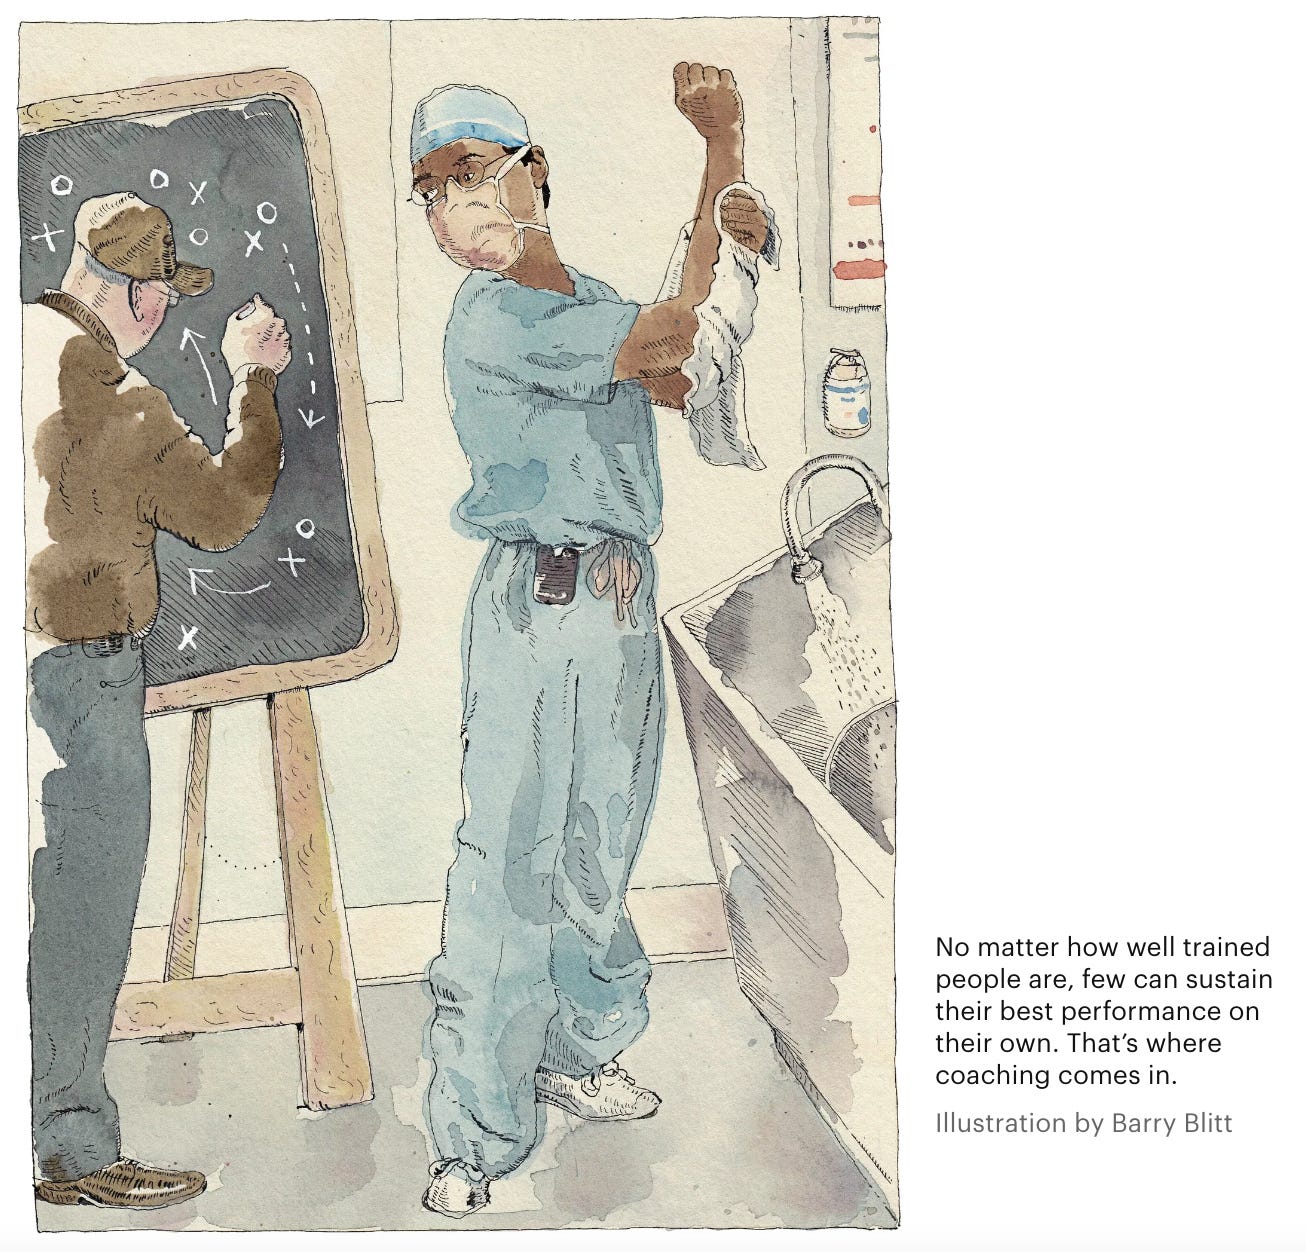 Illustration of a surgeon scrubbing in with a person making notes a blackboard behind them. Caption reads: no matter how well trained people are, few can sustain their best performance on their own. That's where coaching comes in. Illustration by Barry Blitt